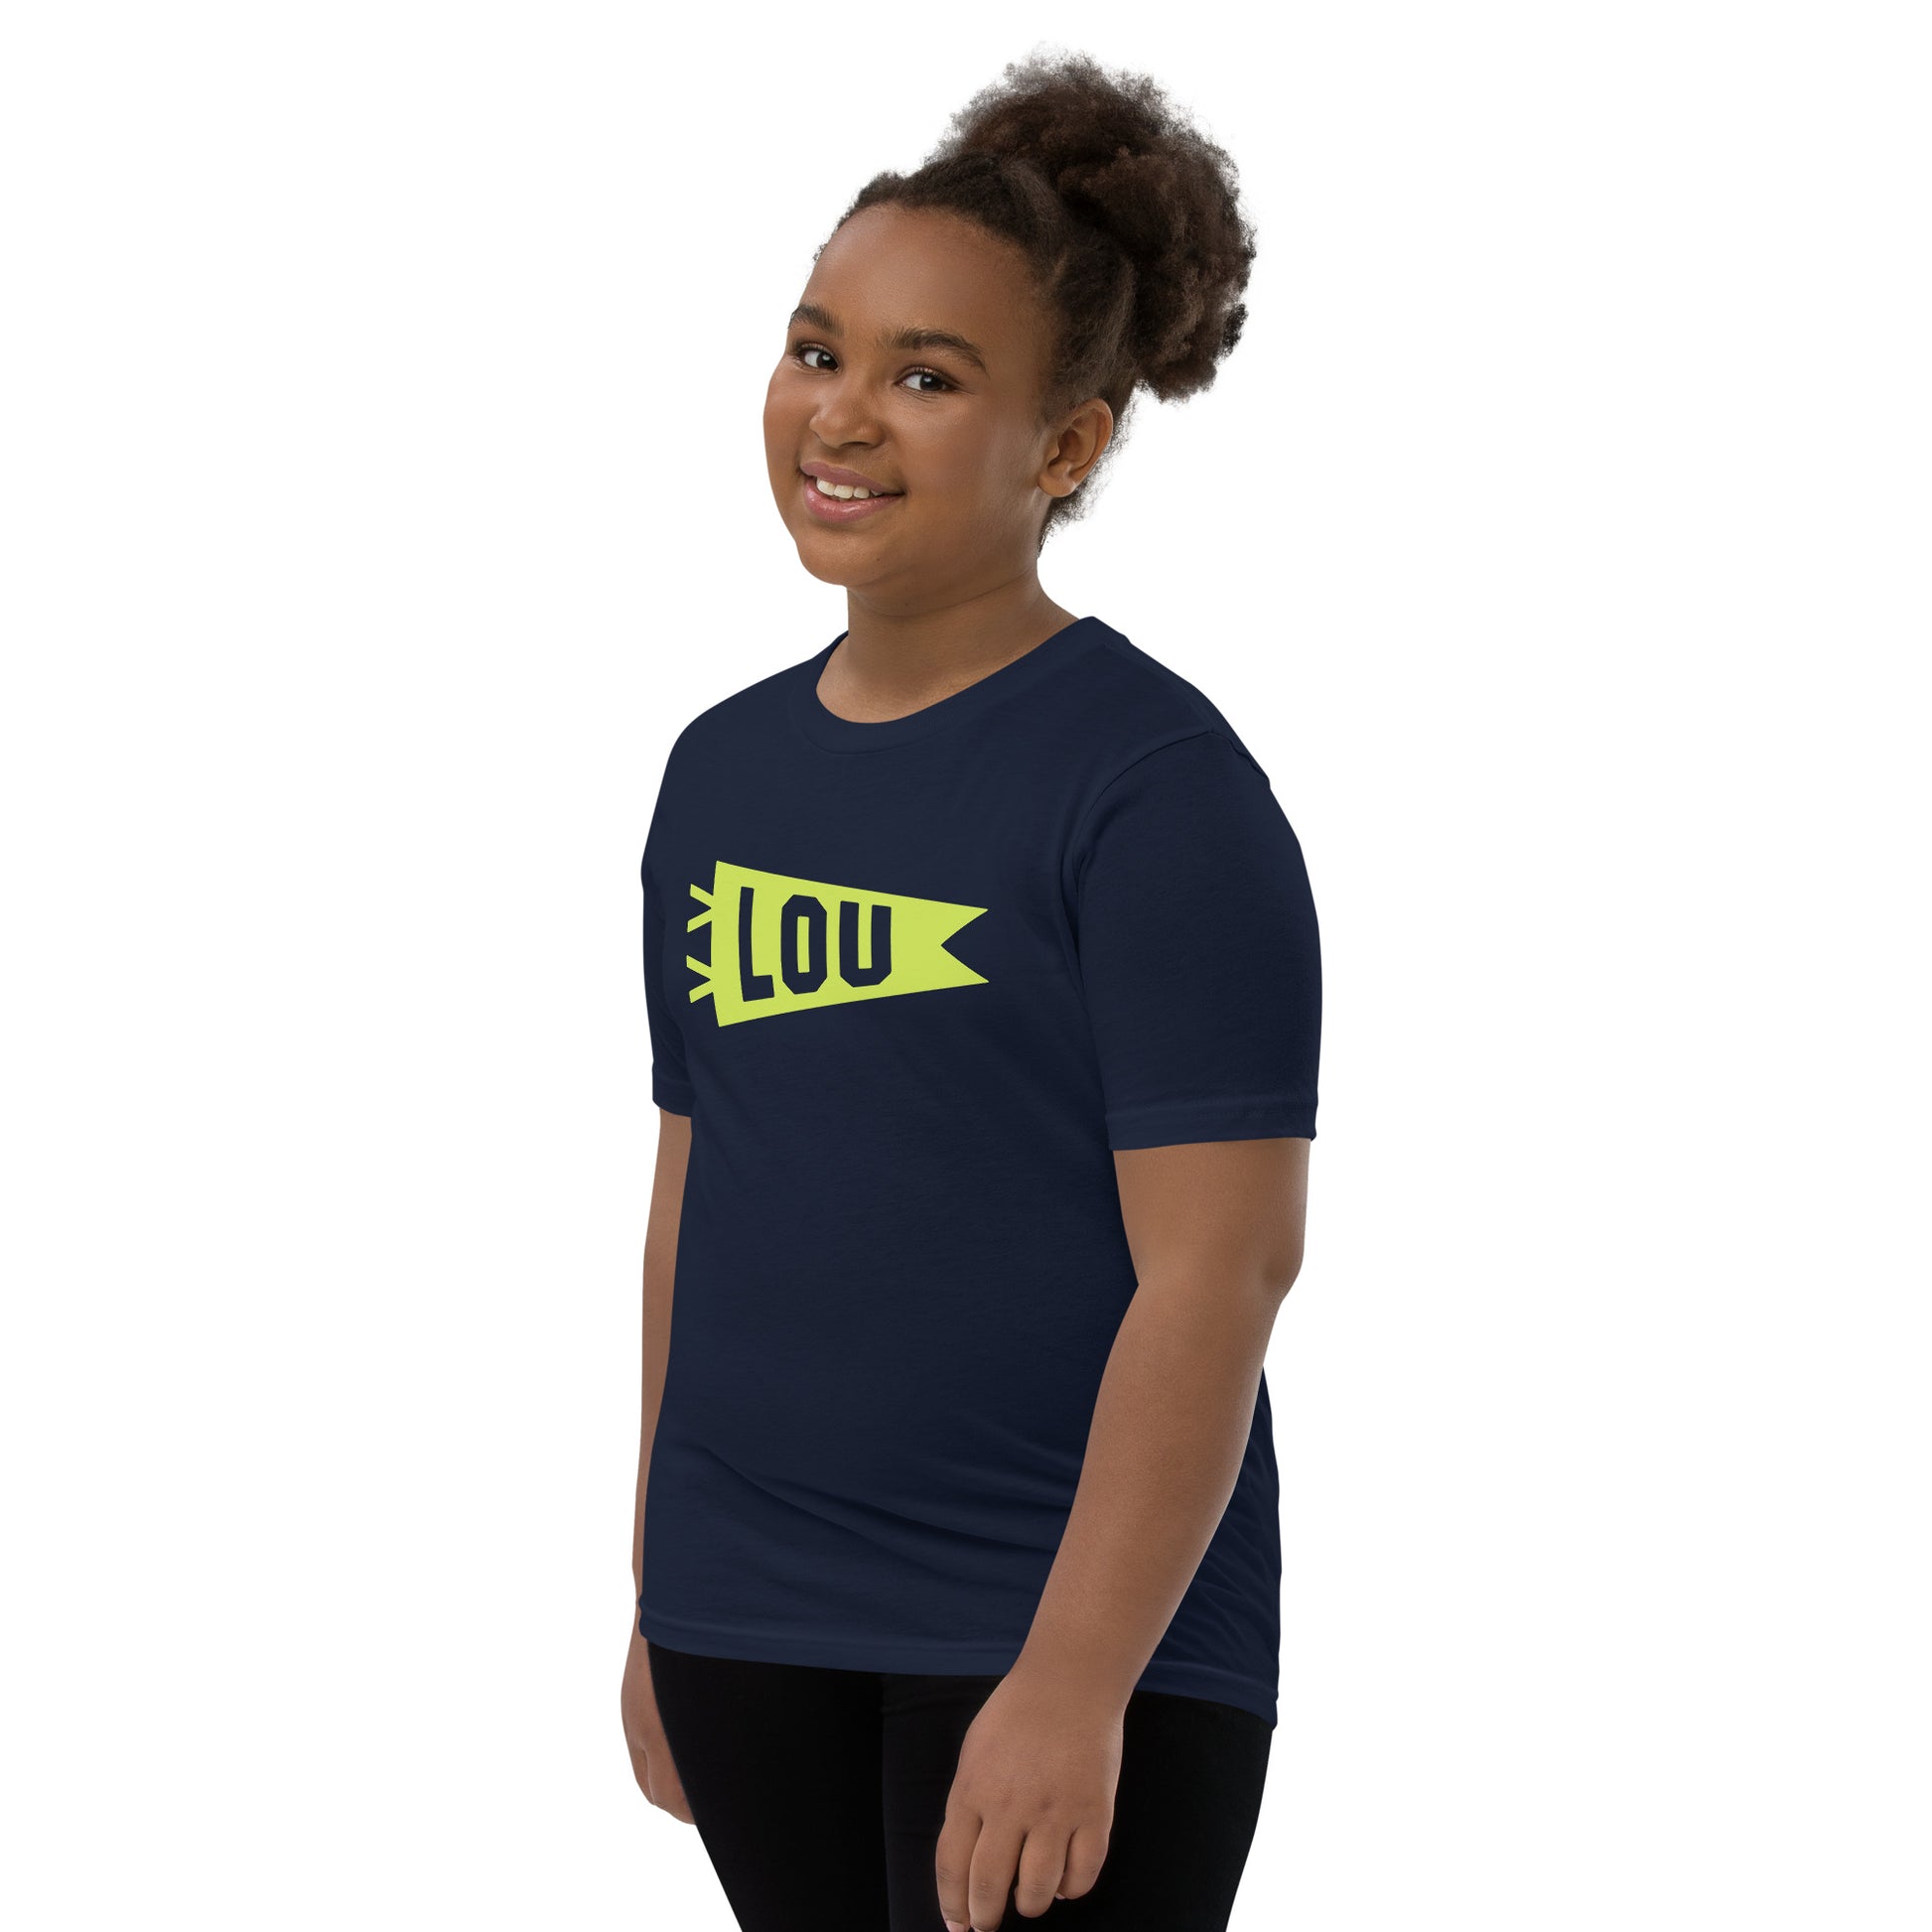 Kid's Airport Code Tee - Green Graphic • LOU Louisville • YHM Designs - Image 04